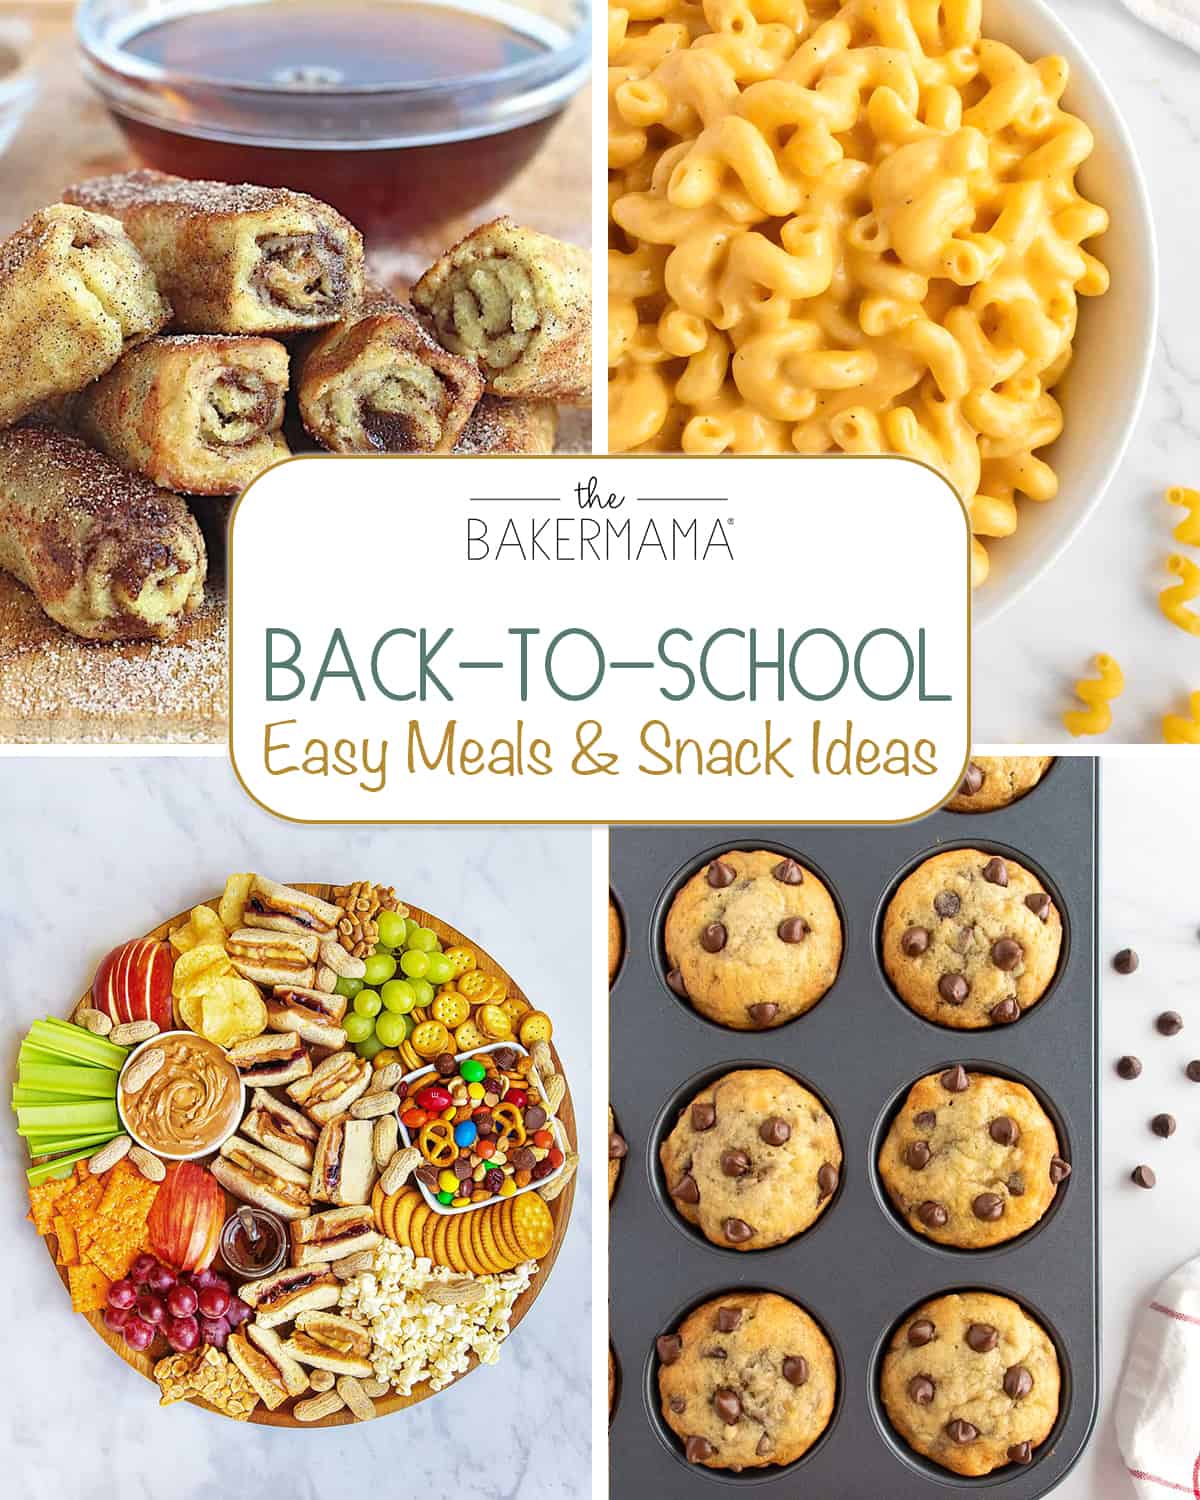 Back to School Recipes by The BakerMama